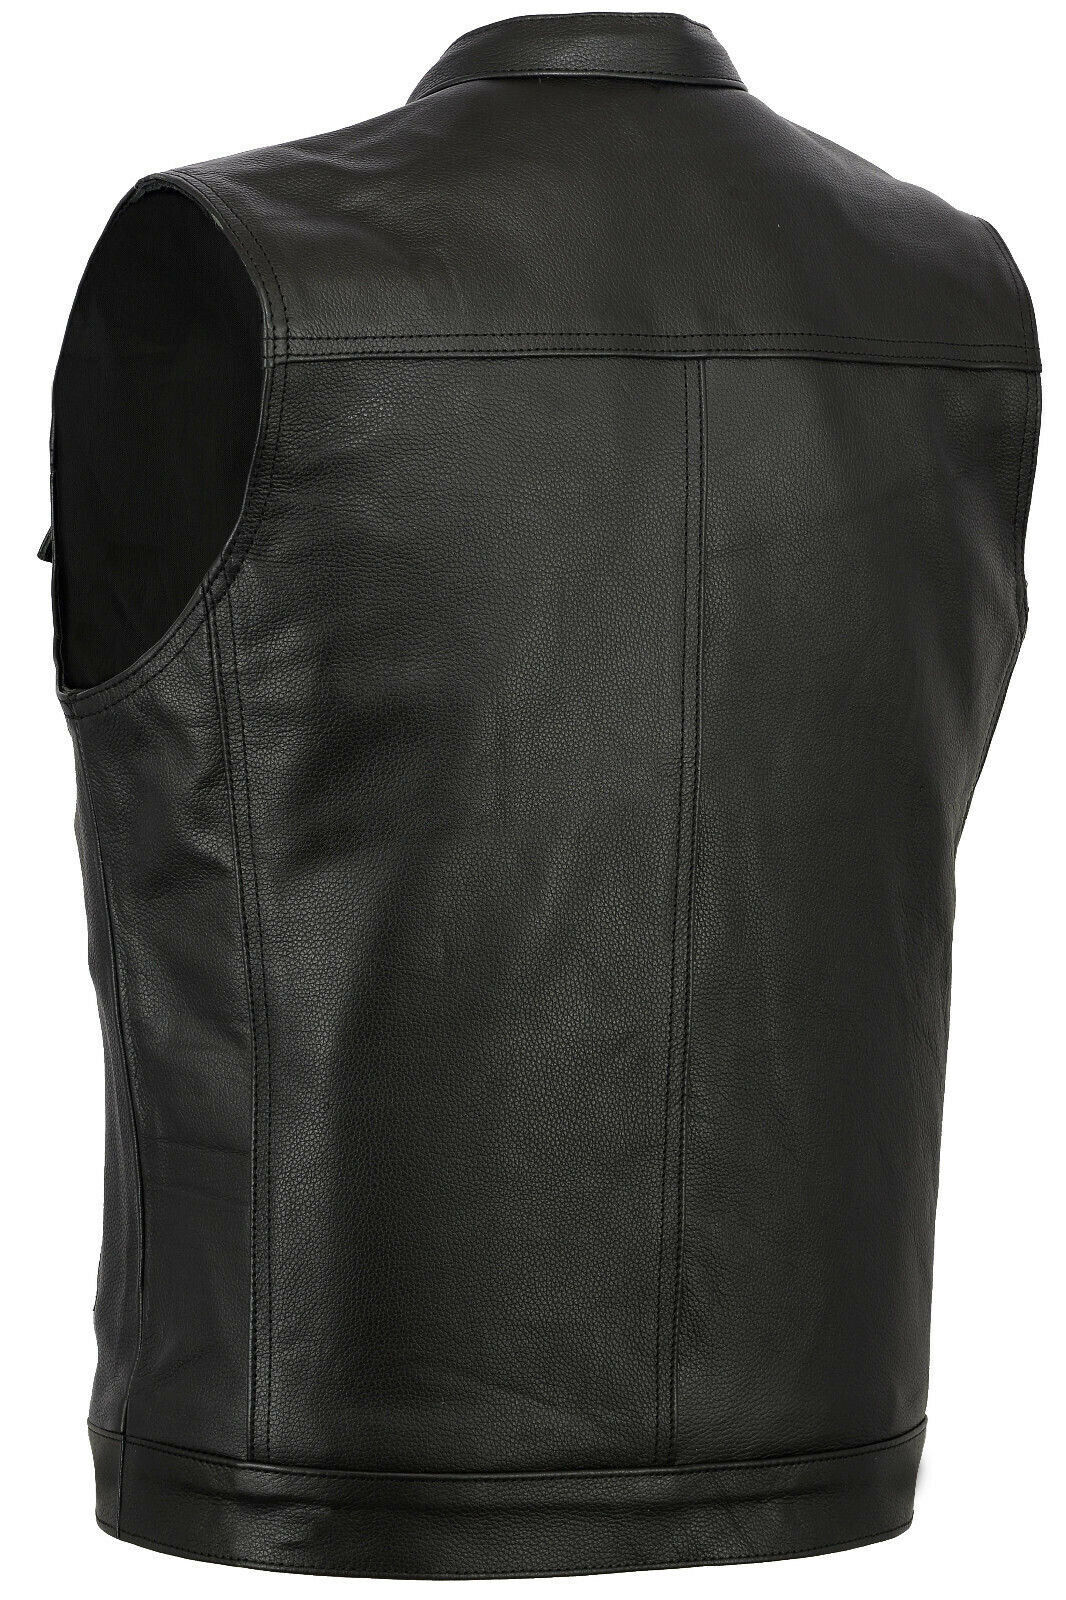 BGA Sons of Anarchy Motorcycle Leather Vest Black